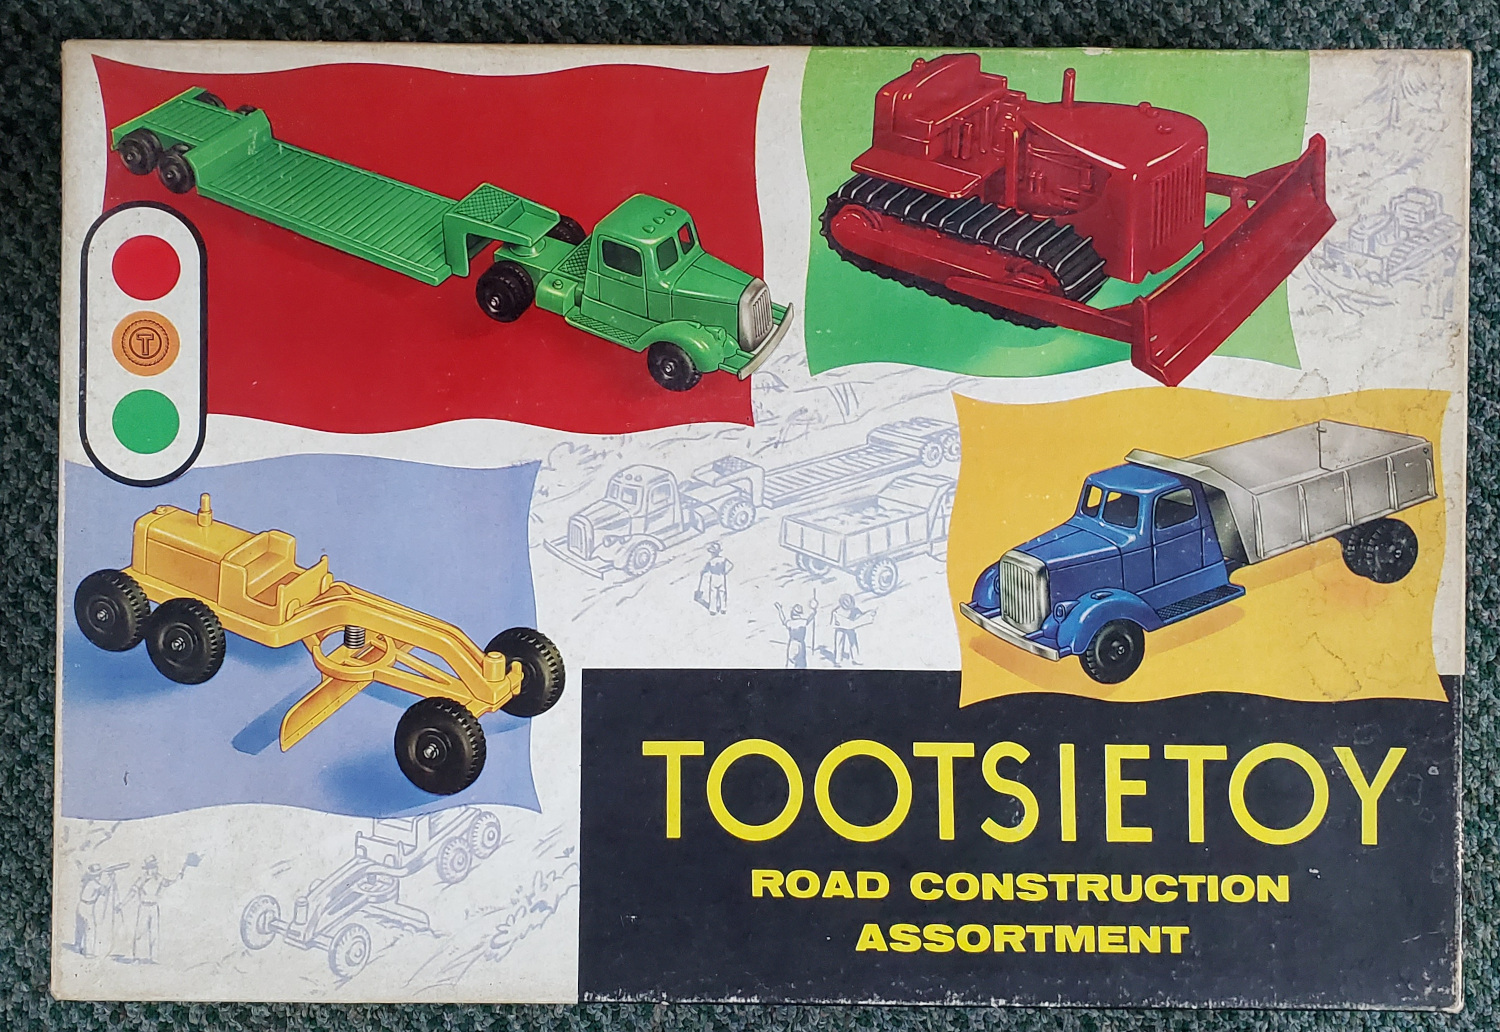 1956 Tootsietoy No. 6000 Road Construction Assortment in the Box 1